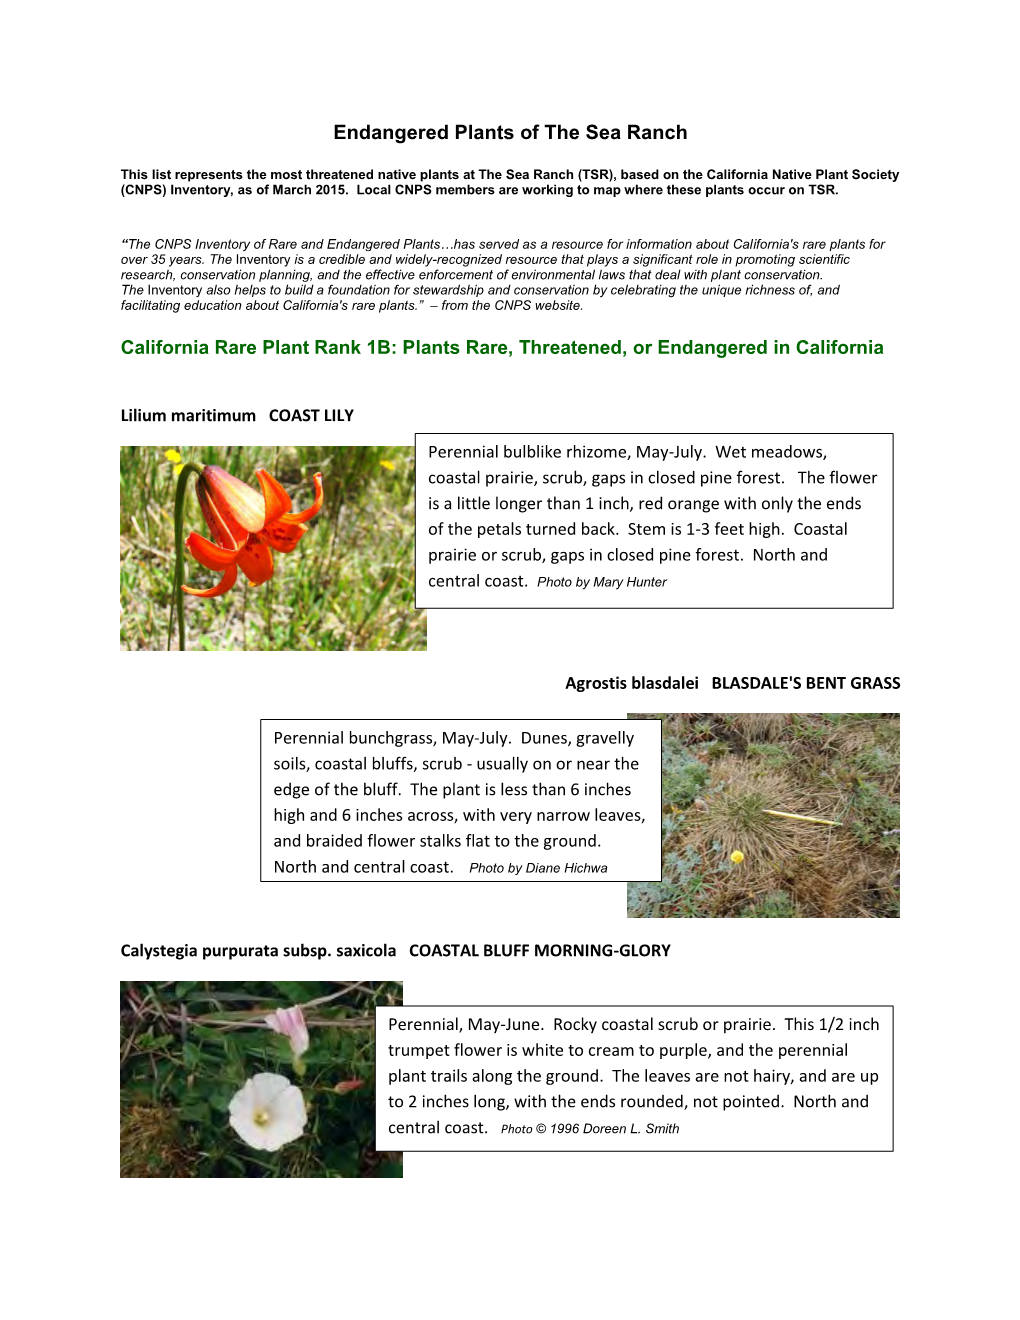 Endangered Plants of the Sea Ranch